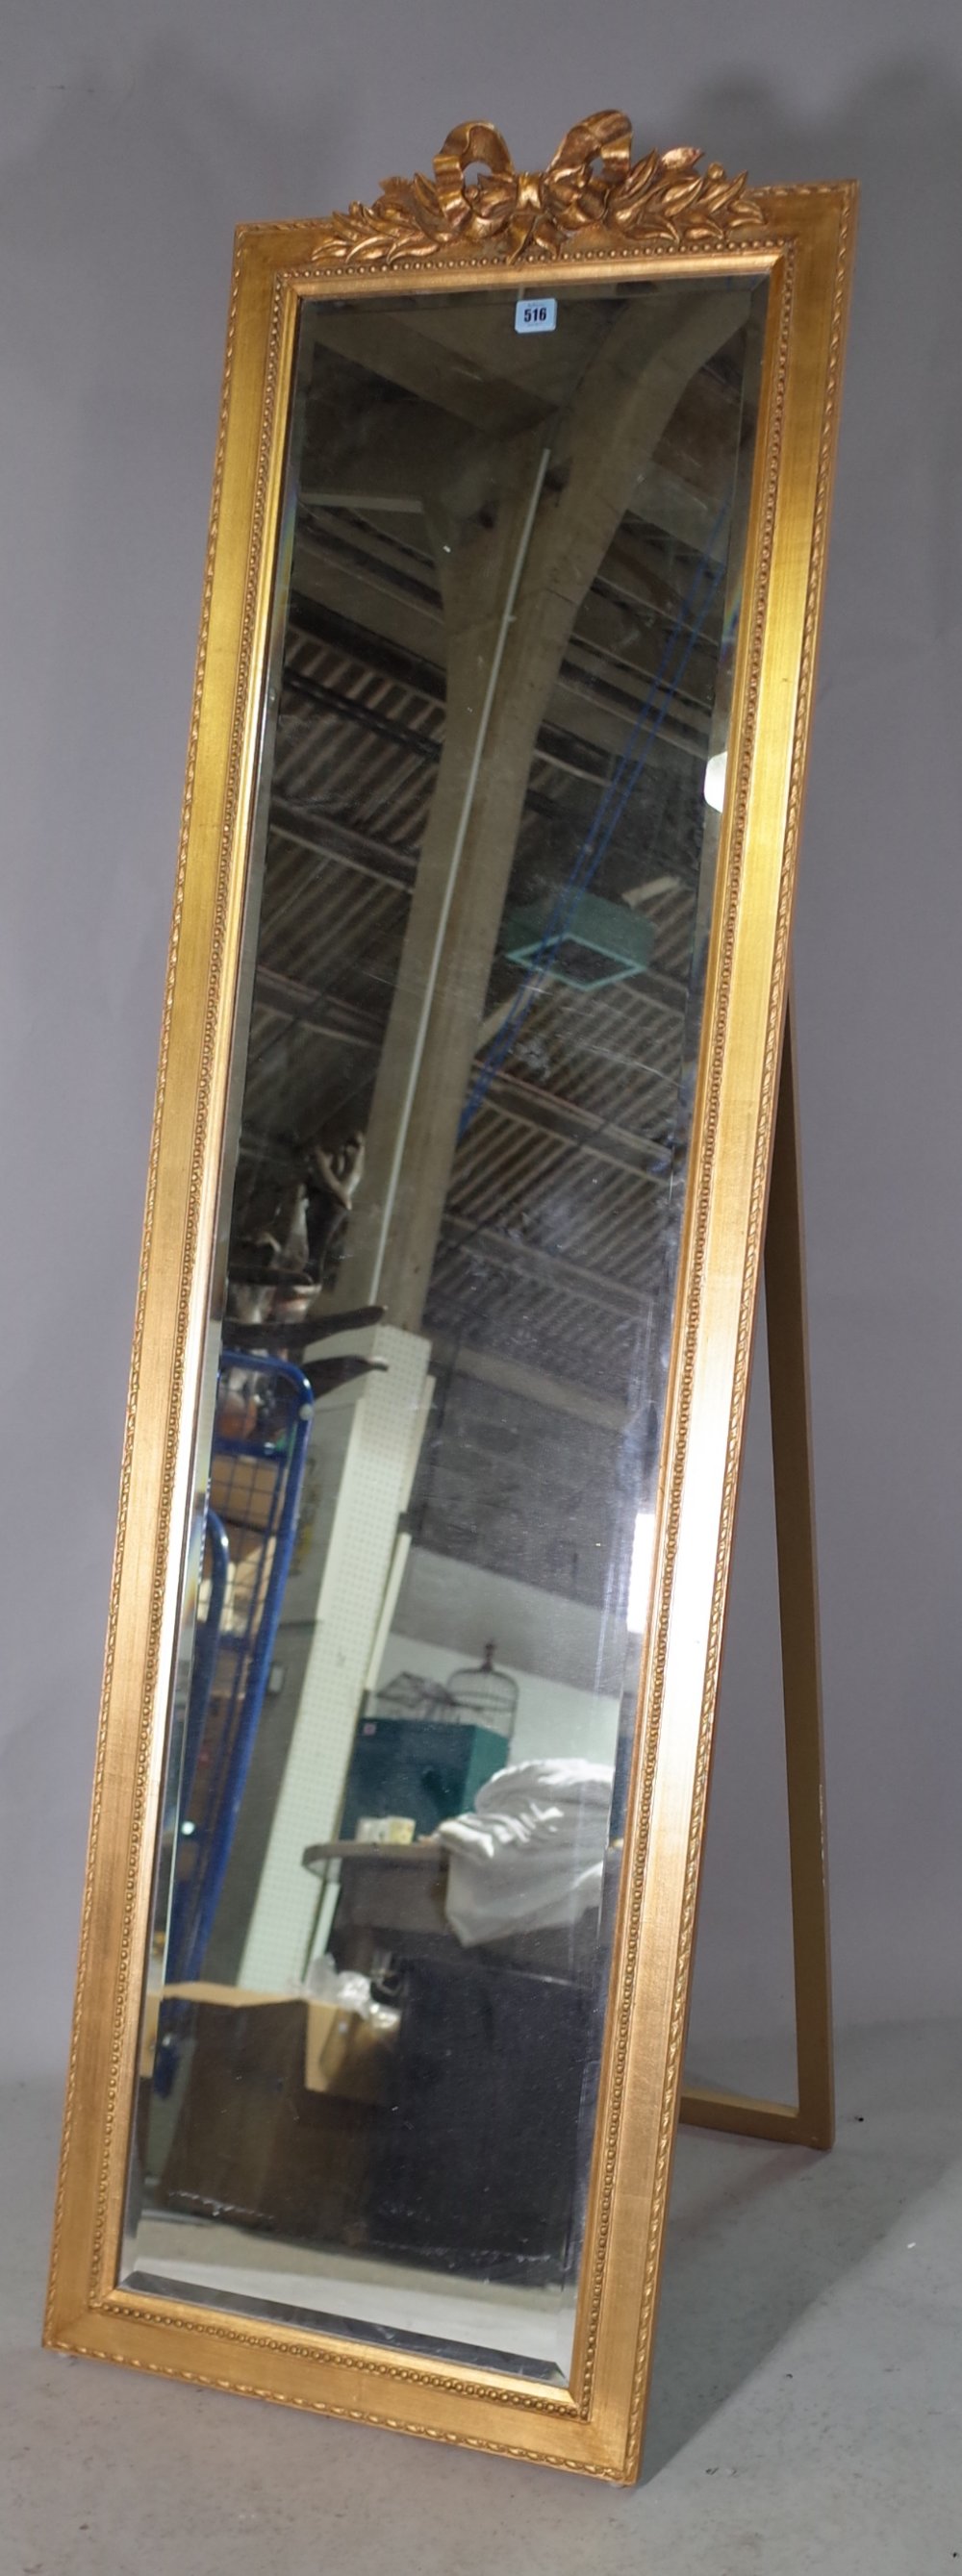 A 20th century gold painted floor standing dressing mirror with ribbon tied crest, - Image 2 of 2